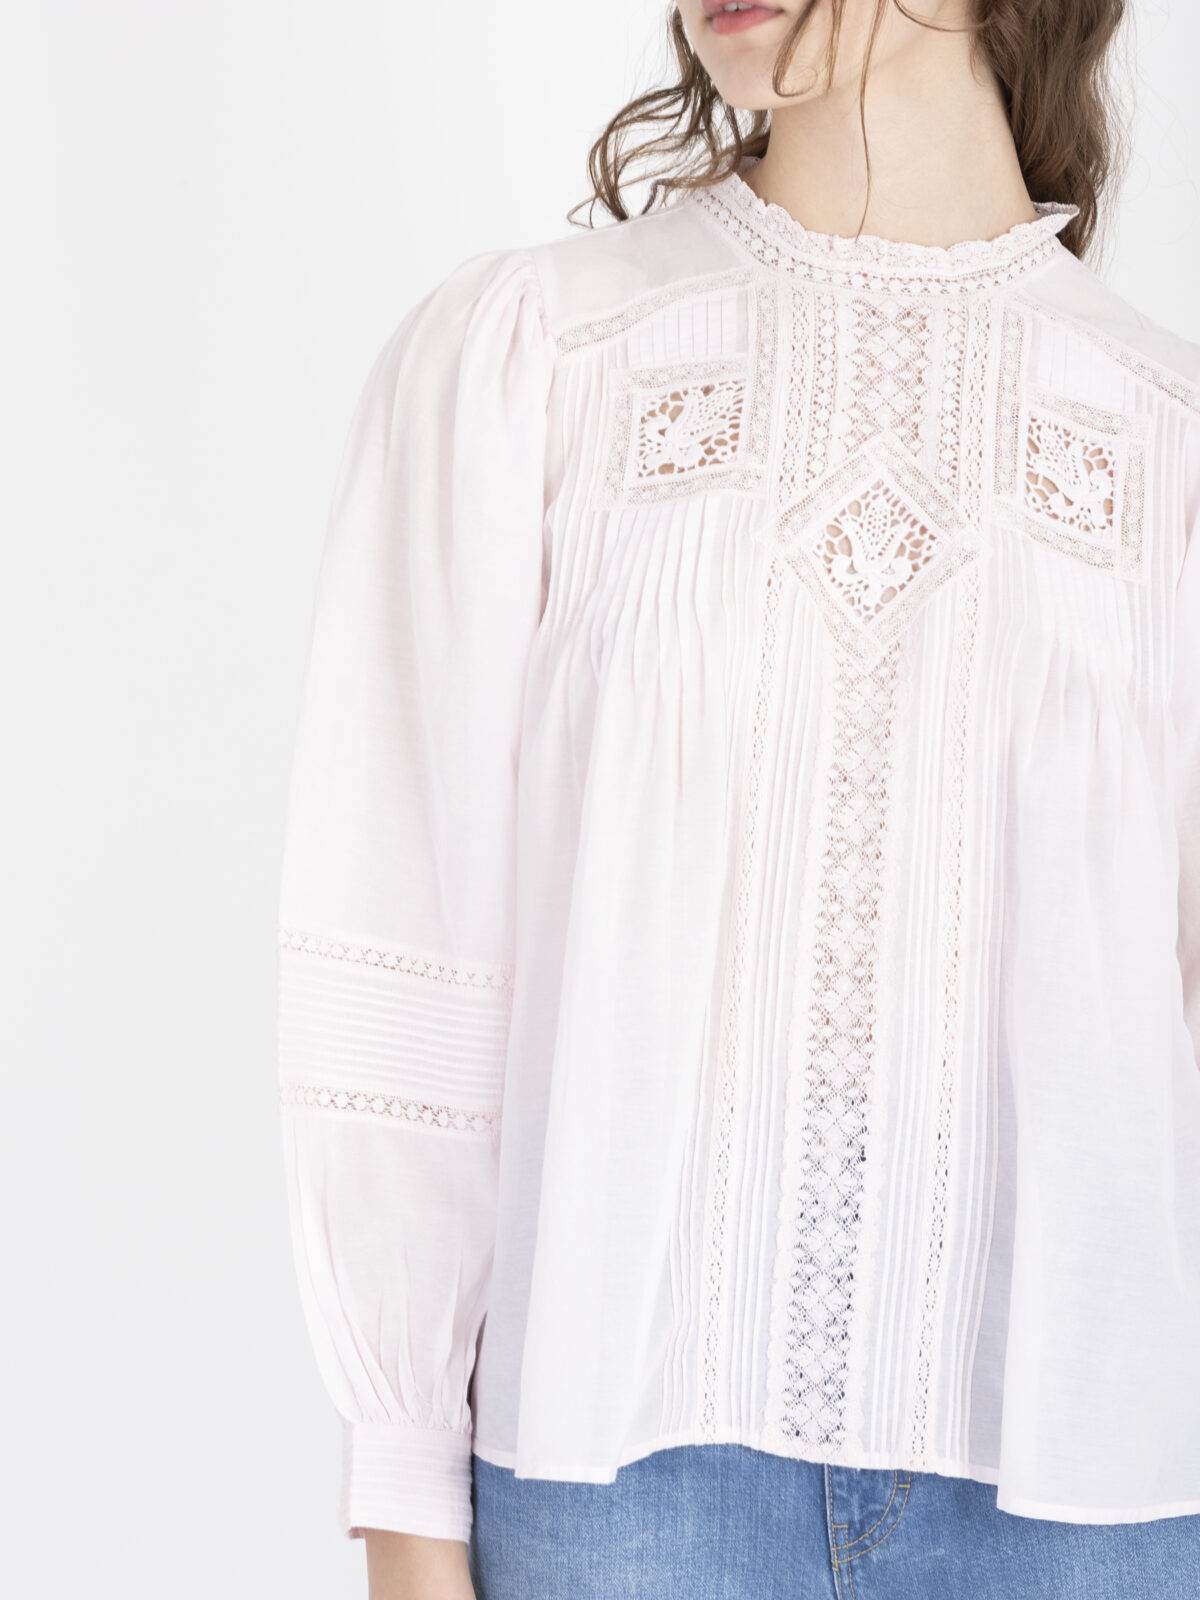 calin-powder-pink-blouse-lace-pleated-puffy-sleeves-cotton-romantic-victorian-vanessa-bruno-matchboxathens